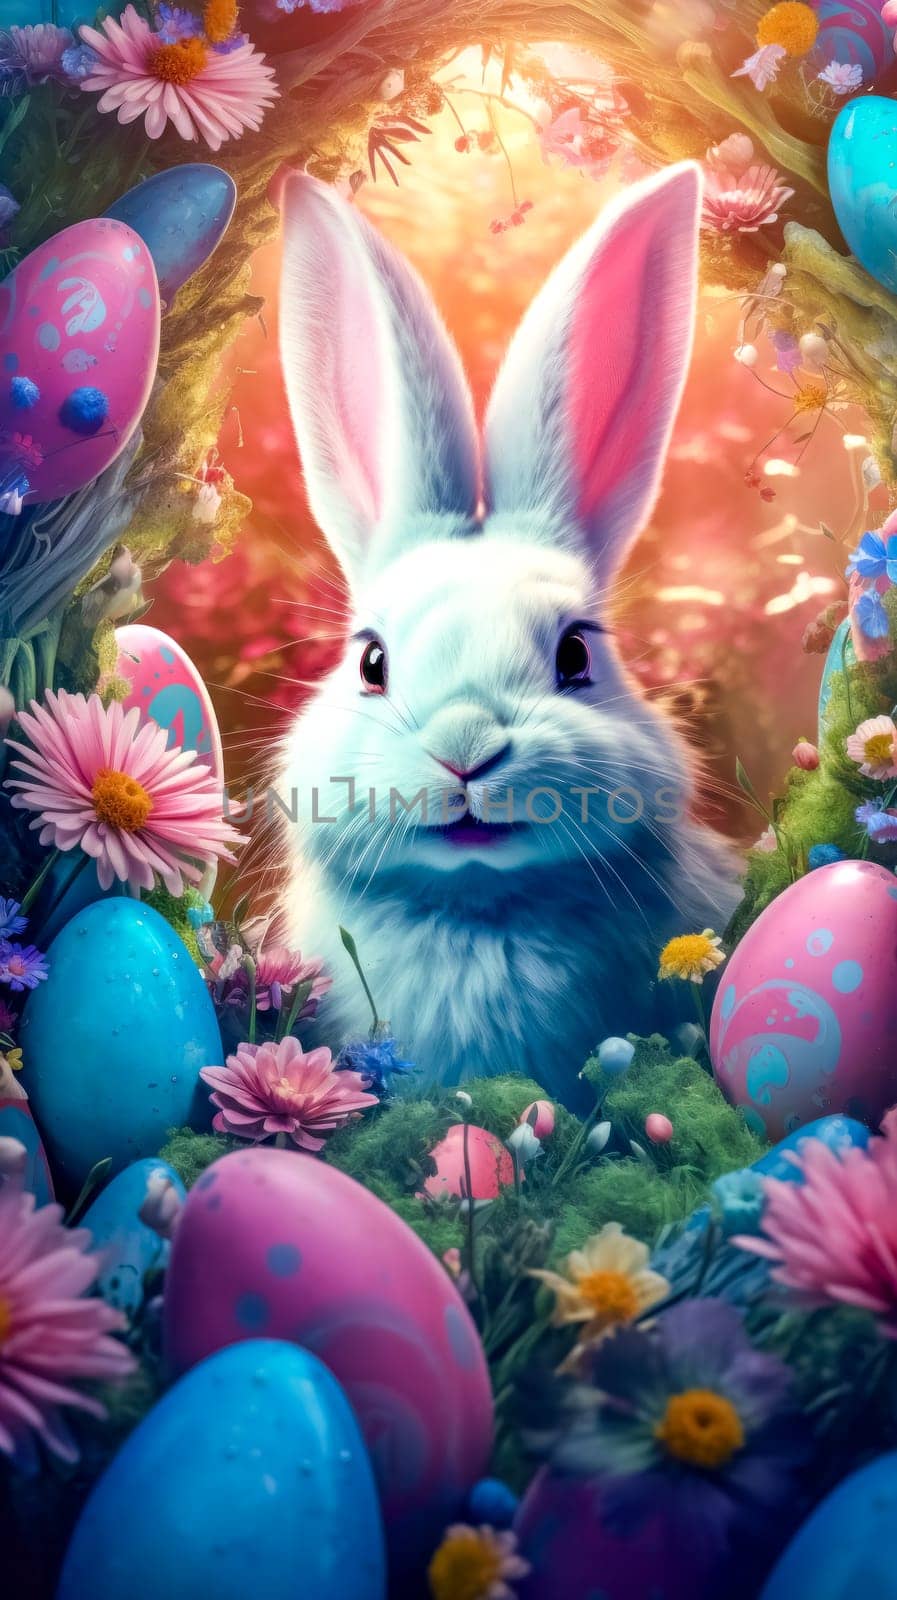 Easter-themed illustration, featuring a white rabbit surrounded by colorful eggs and vibrant spring flowers, encapsulating the joyful spirit of the holiday. by Edophoto